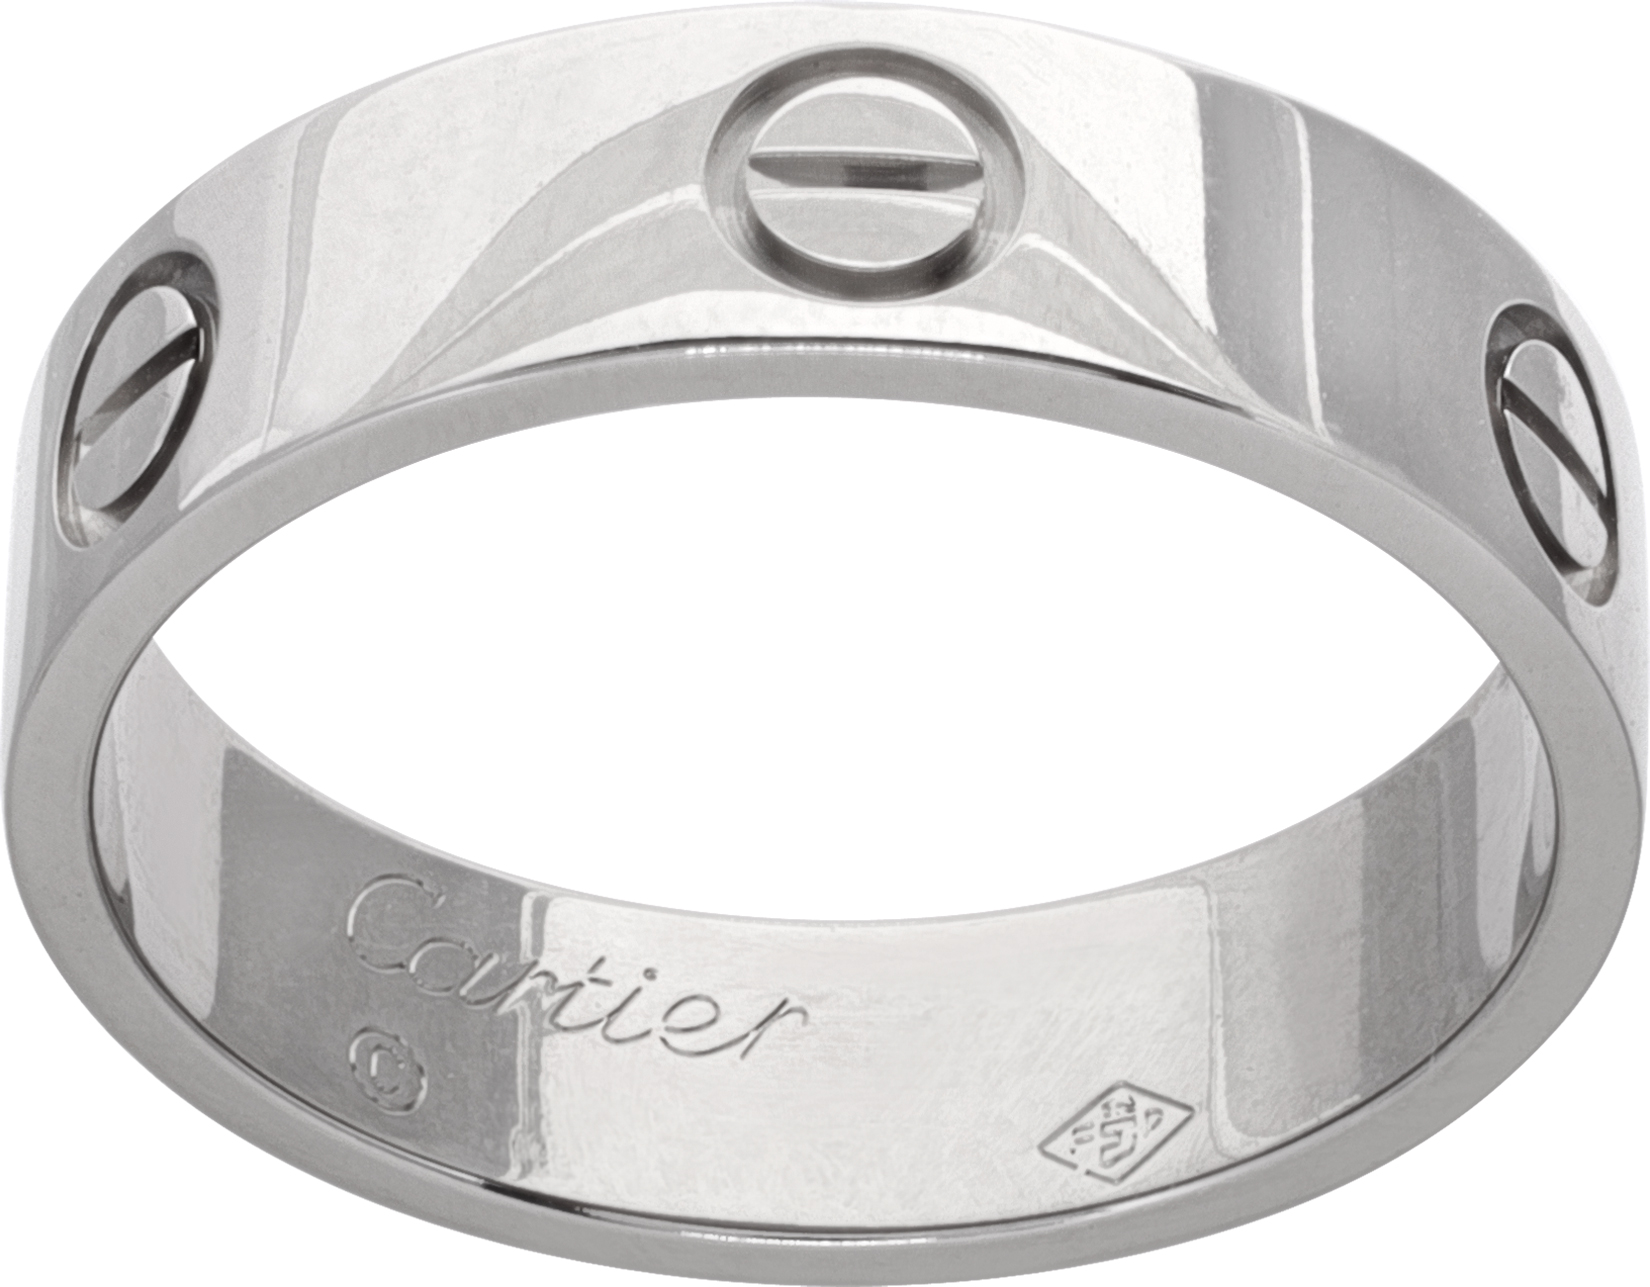 Cartier Love ring in 18k white gold- Size 8.75-